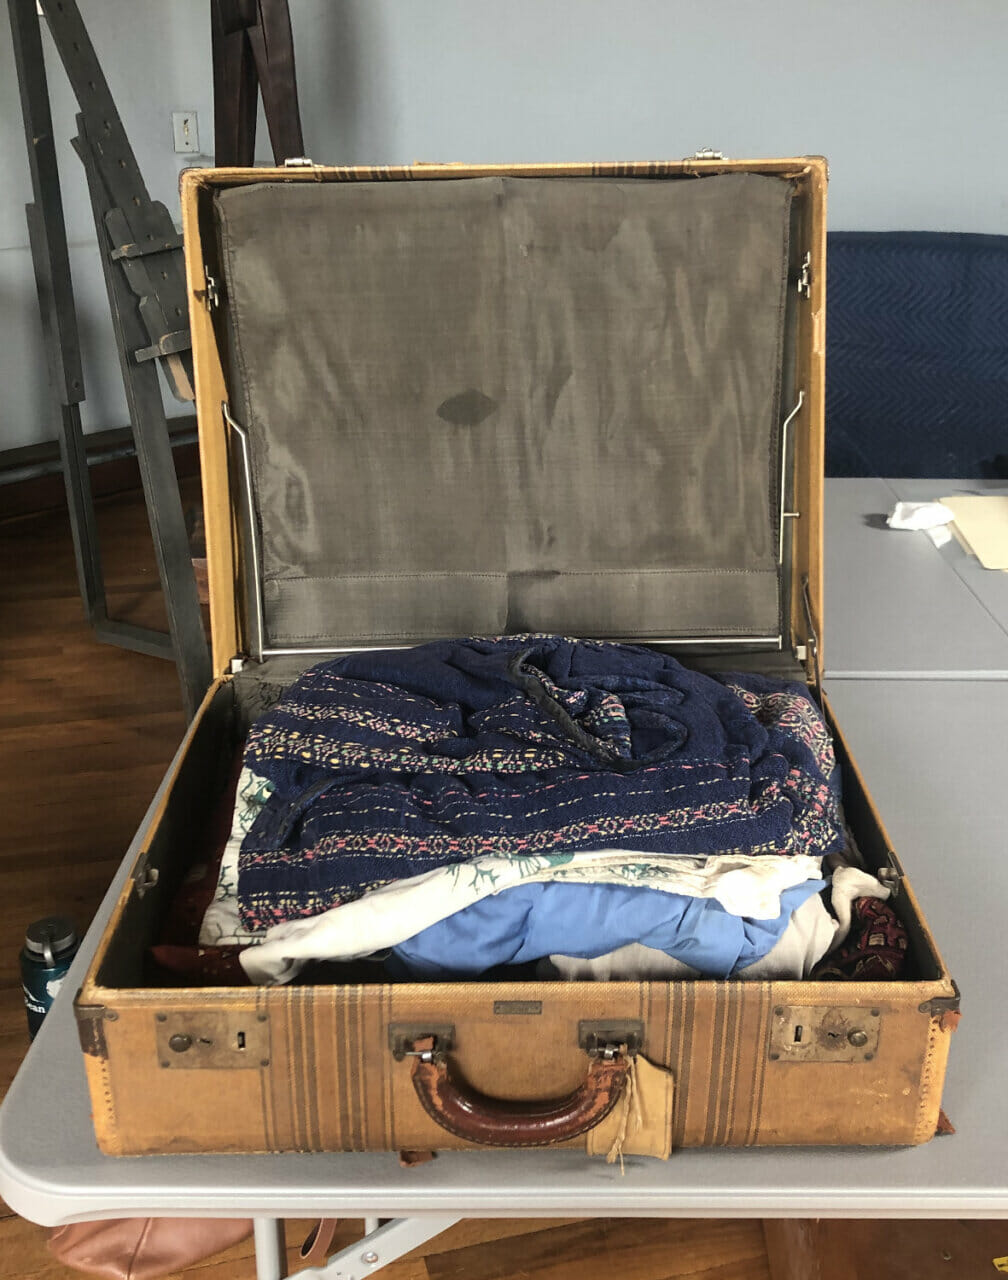 Suitcase filled with weaving samples from Wharton's wife, Letty